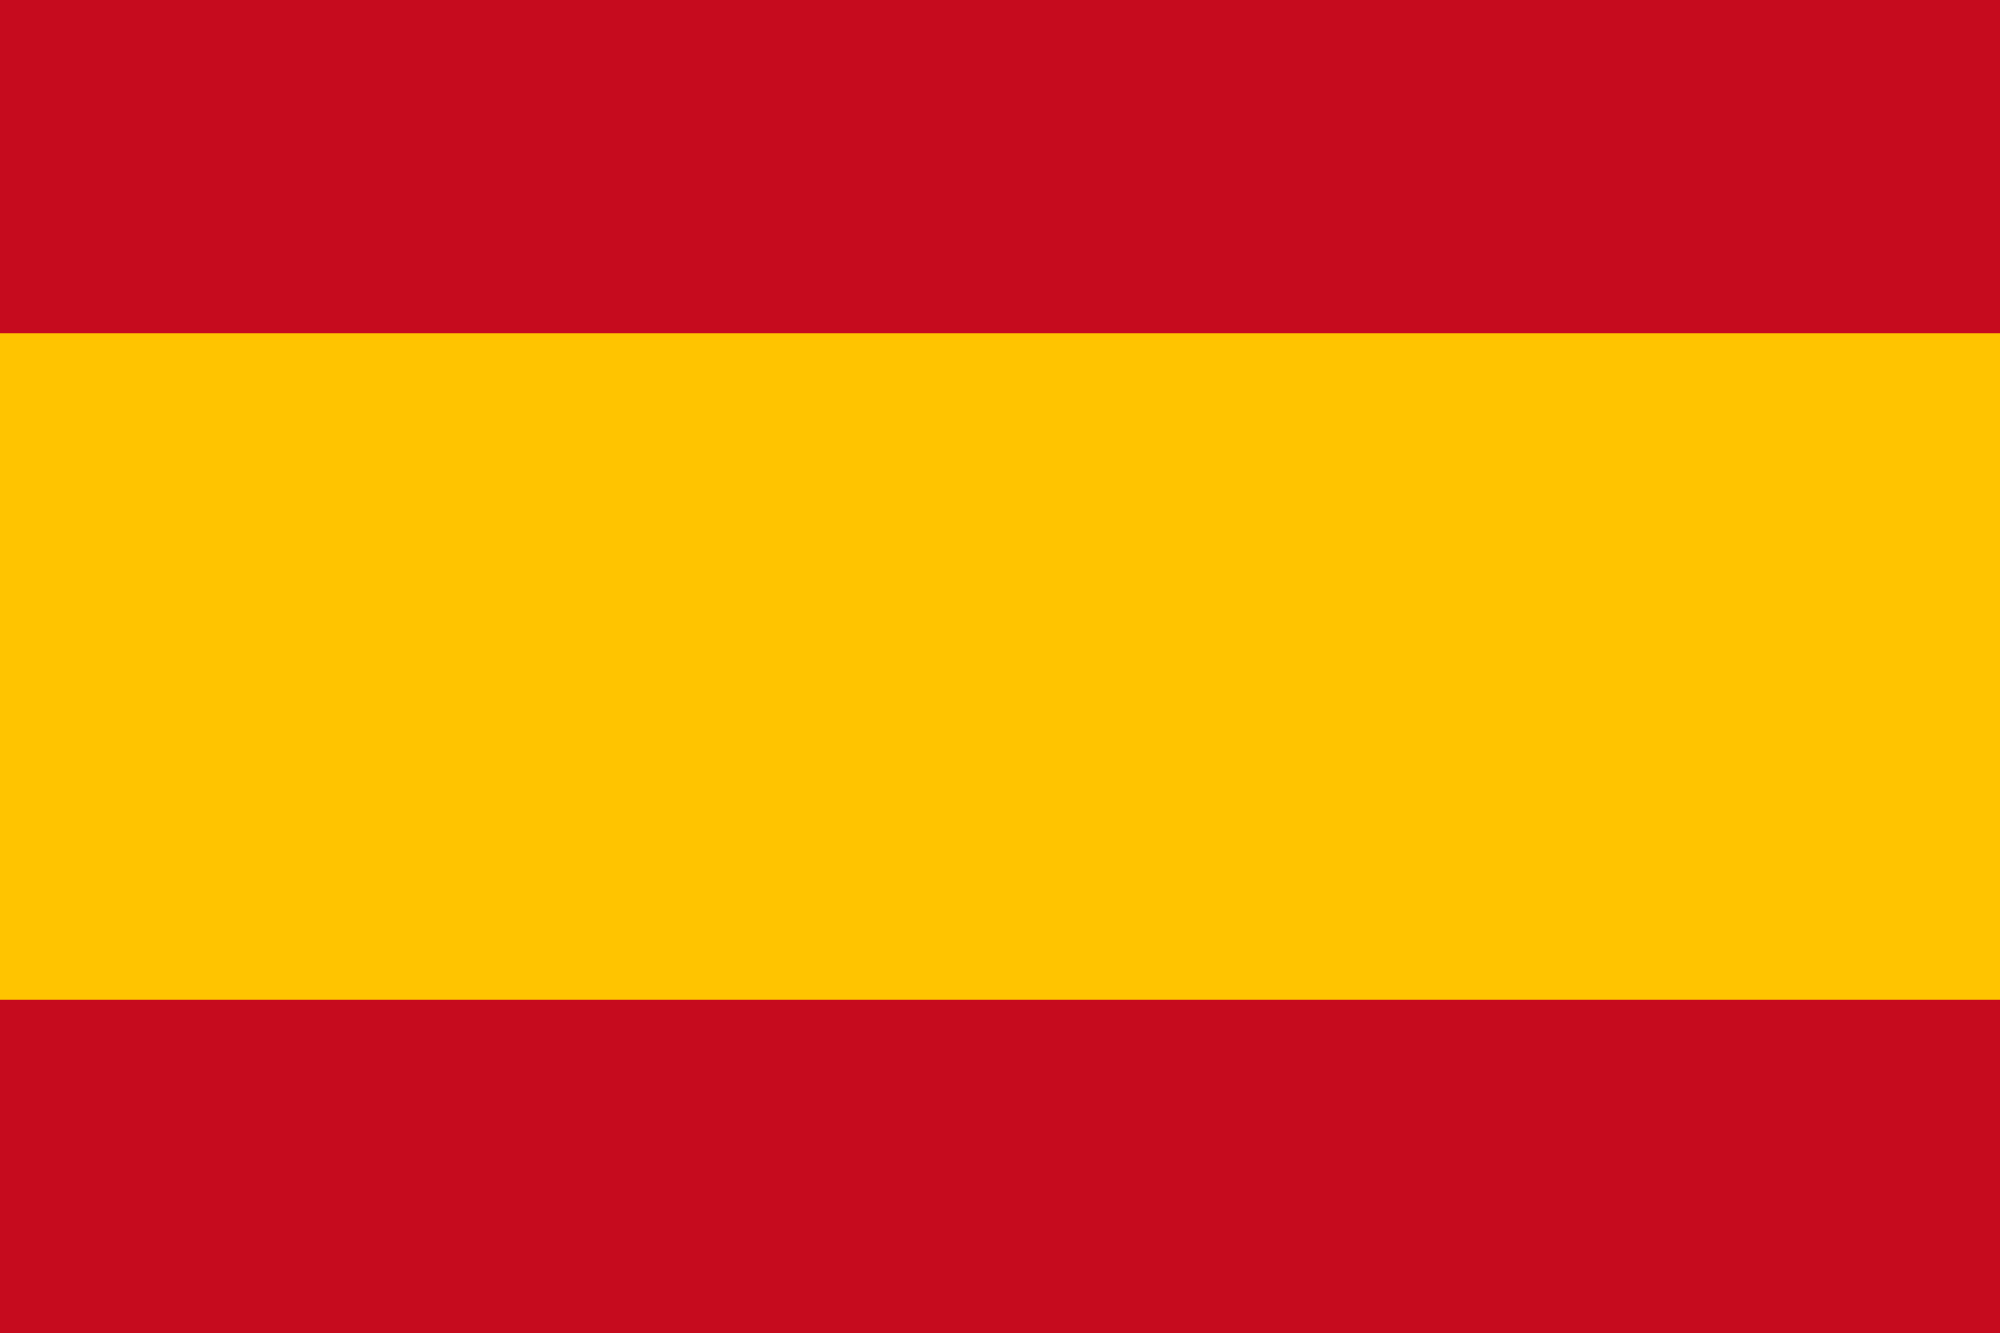 Red with Yellow Banner 1783 Logo - Flag of Spain